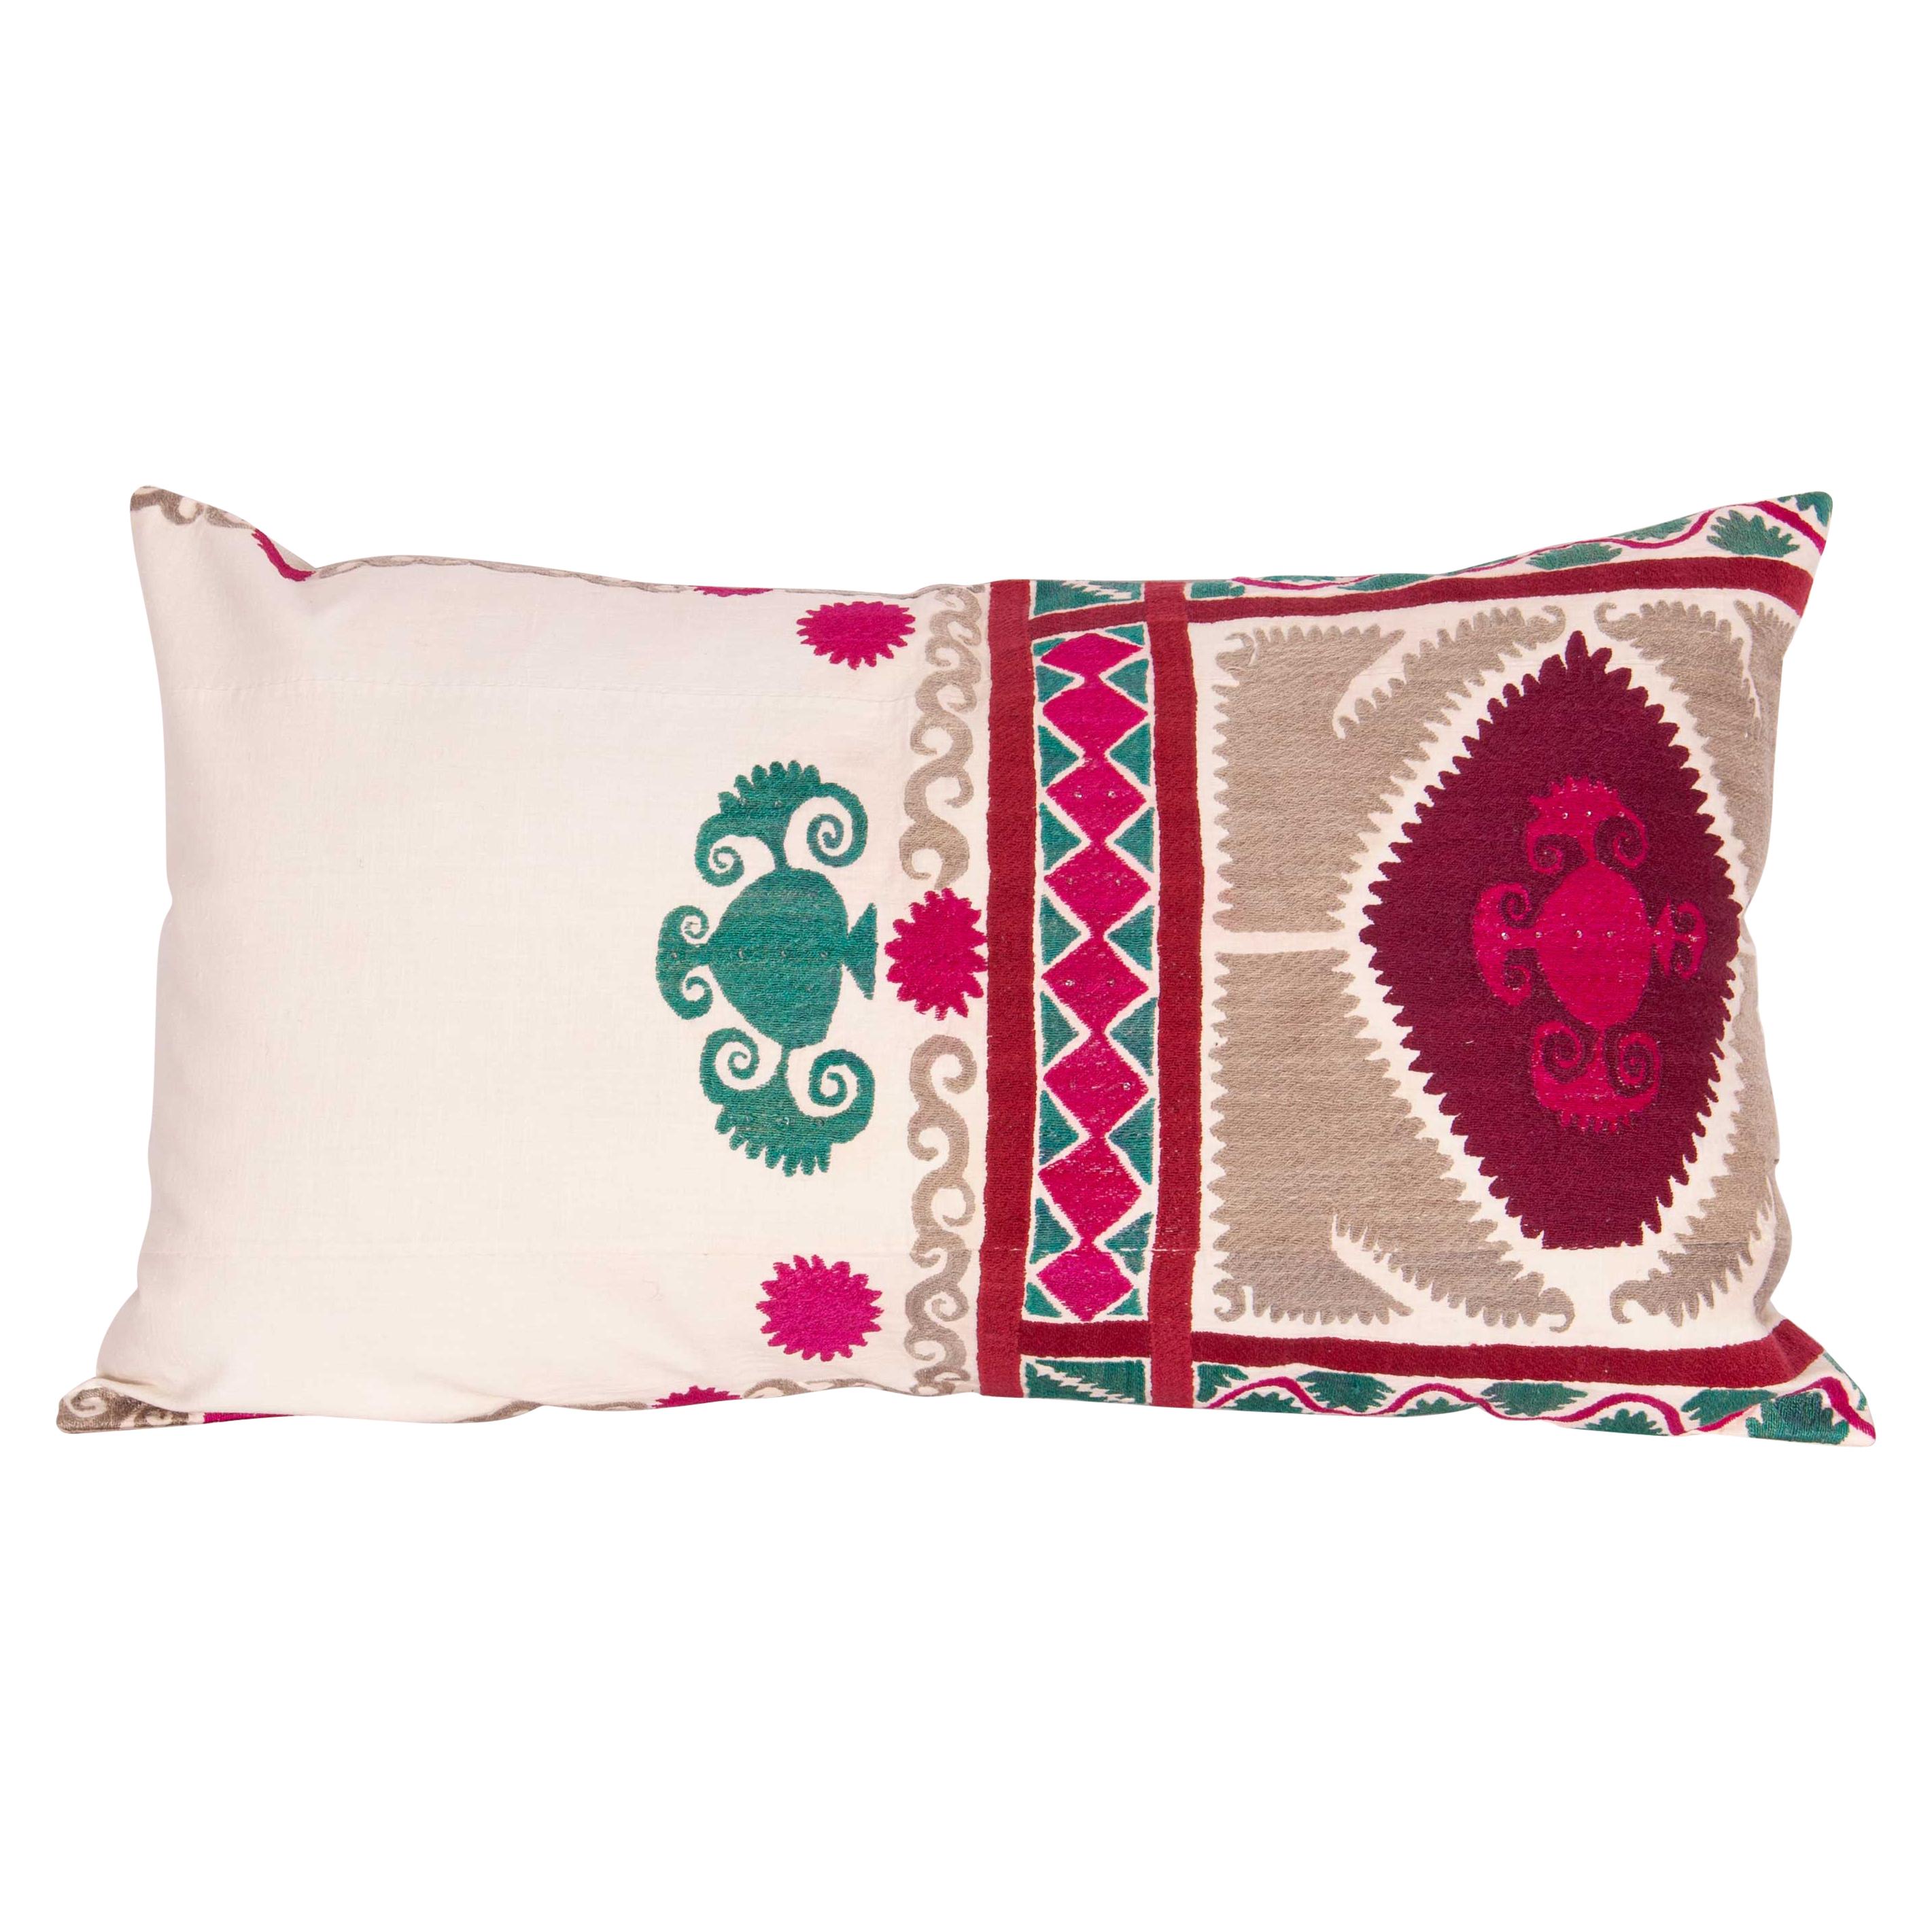 Pillow Case Made from a Vintage Suzani, Uzbekistan, Mid-20th Century For Sale